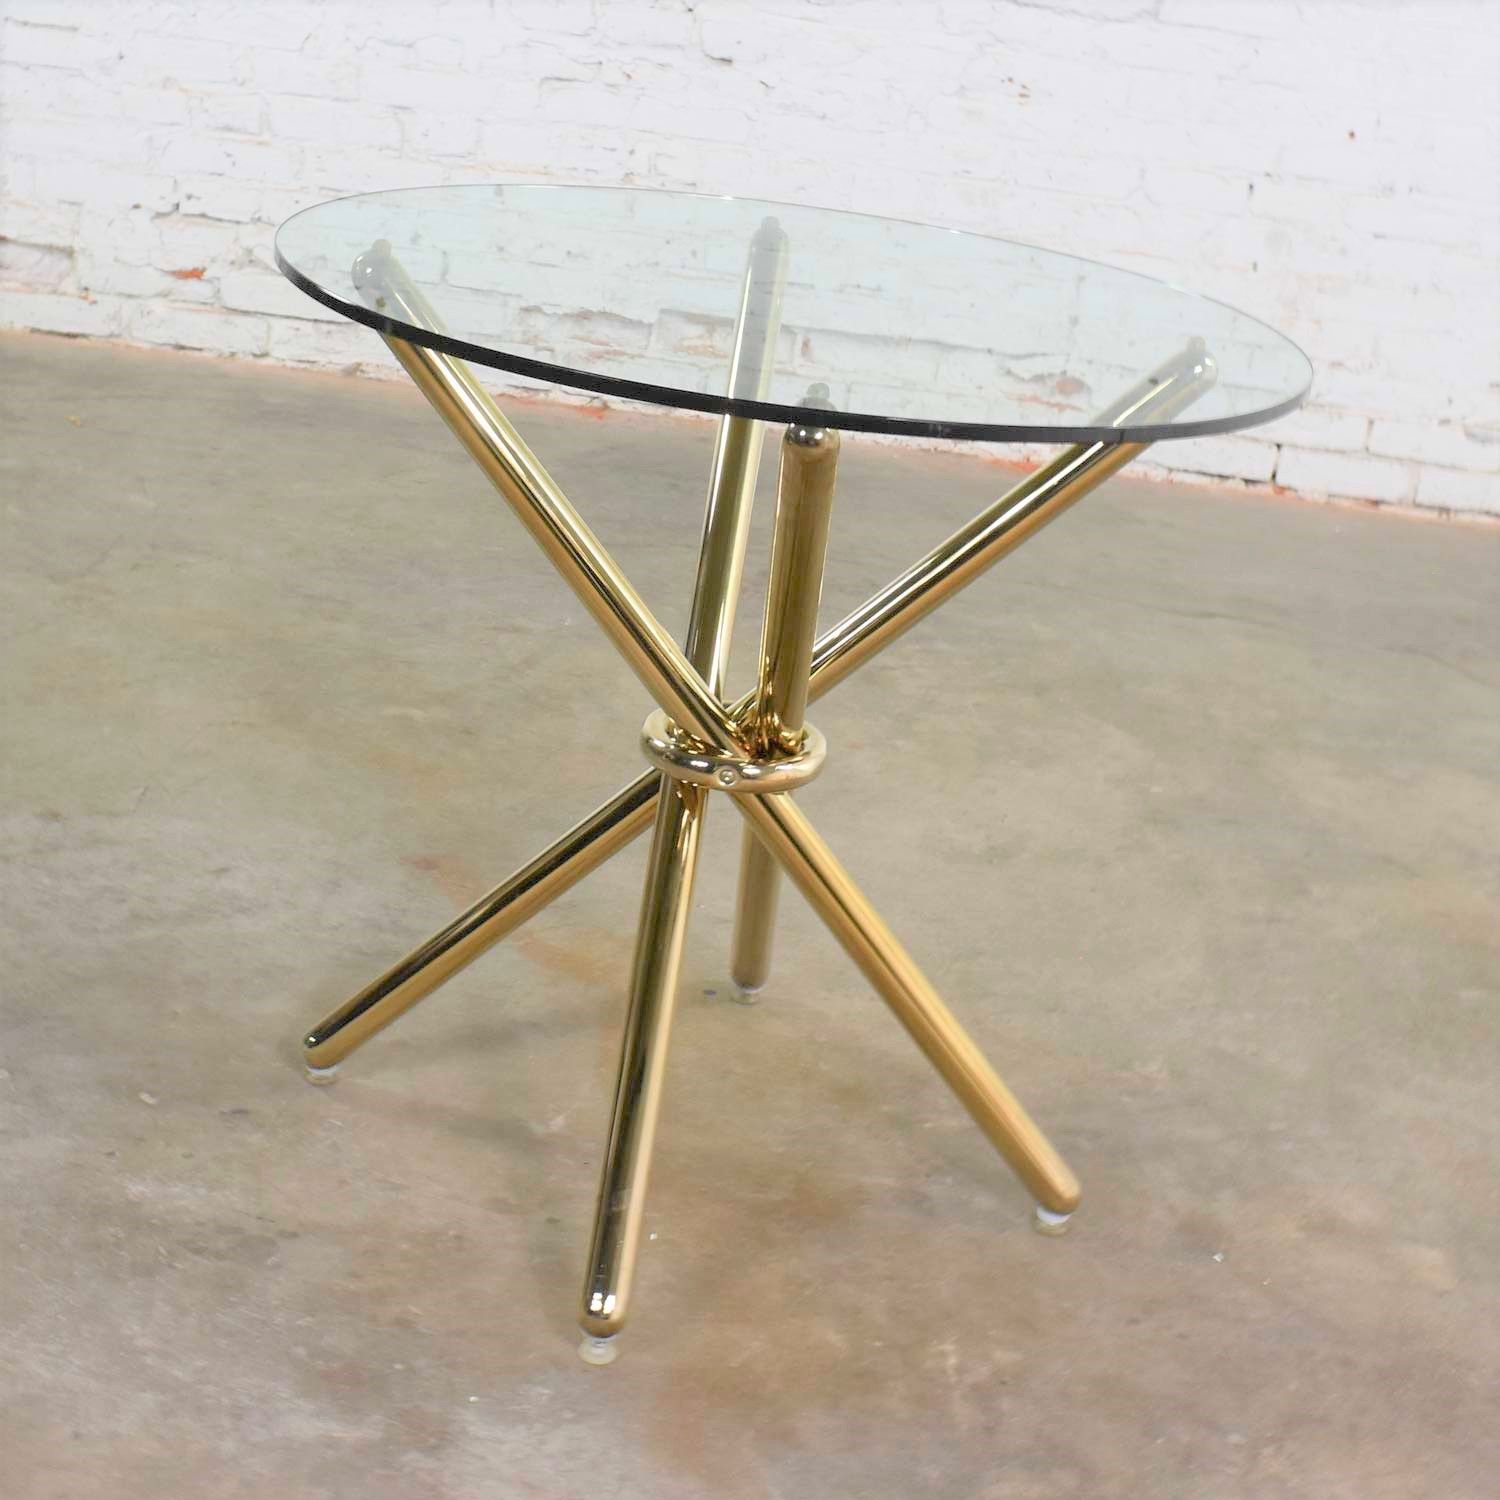 Vintage Modern Brass Plated Jax Center Or End Table With Round Glass Throughout Antique Brass Aluminum Round Console Tables (View 9 of 20)